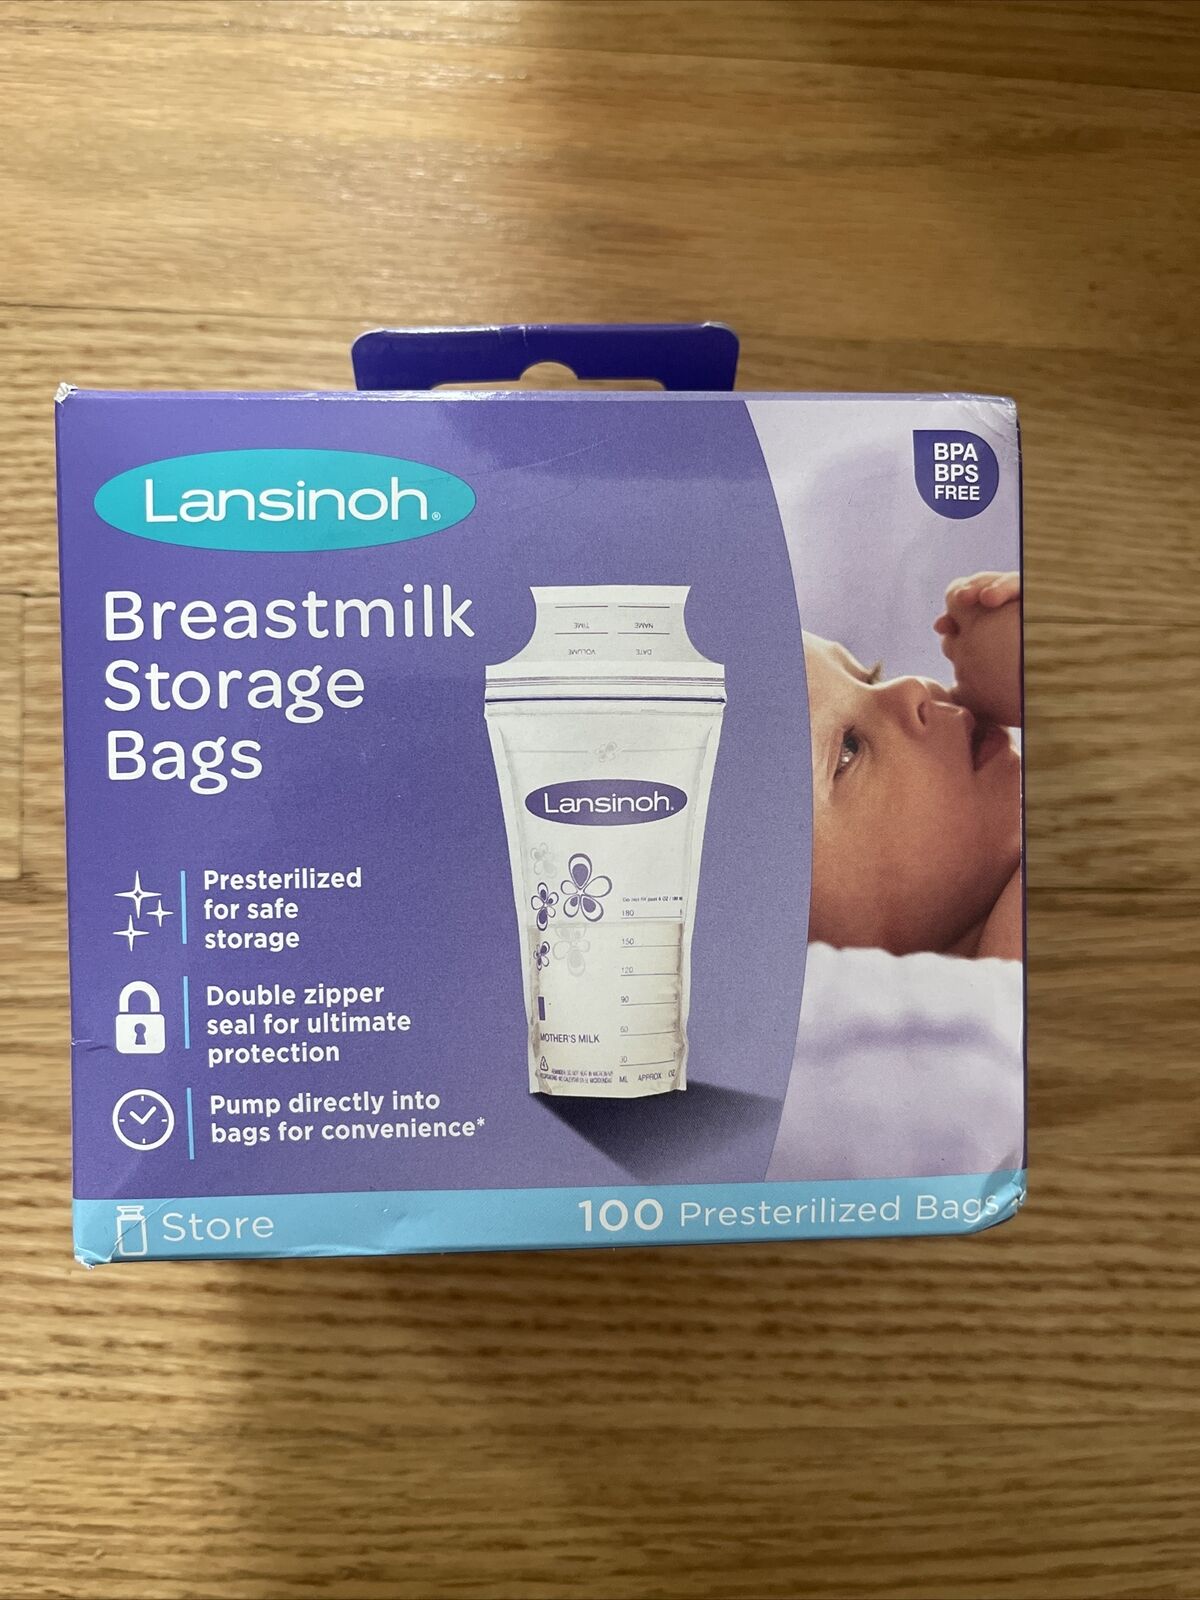 NEW UNOPENED Clearance SALE Limited time Max 70% OFF BOX Lansinoh Breastmilk count Bags Storage 100